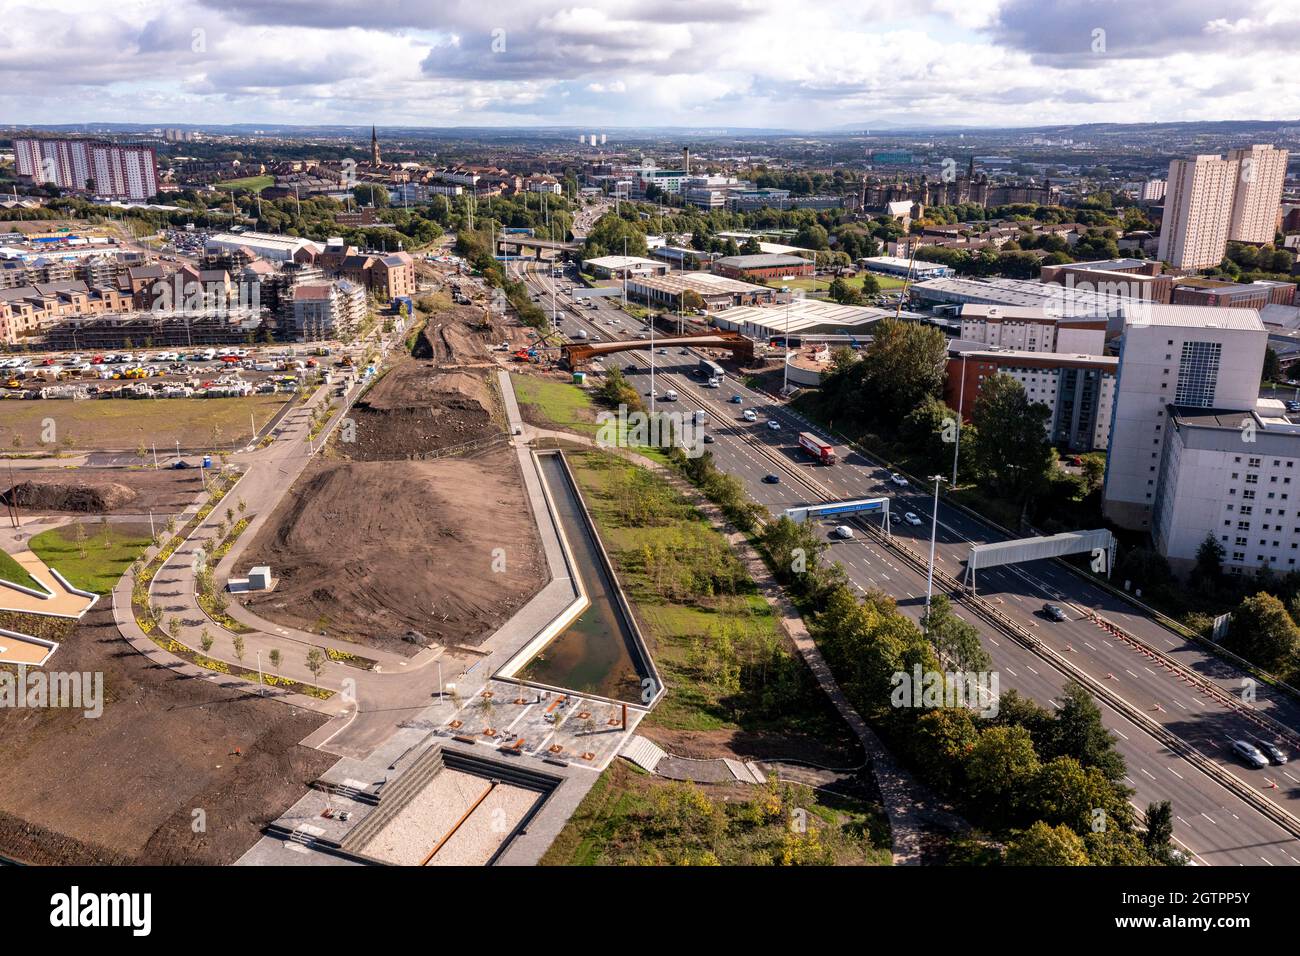 Glasgow, Scotland, UK. 29 September 2021 PICTURED:  New bridge at Sighhill over the M8 motorway. Aerial drone view of Glasgow’s Sighthill area showing the new bridge over the M8 Motorway which joins the north of the city centre form the East going through to Charing Cross. The Sighthill area is seeing a capital investment of £250million with new recreational areas and social housing to the north of the city. Also in the area are white water rafting and kayaking training centres along with wakeboarding training facilities. Credit: Colin Fisher Stock Photo